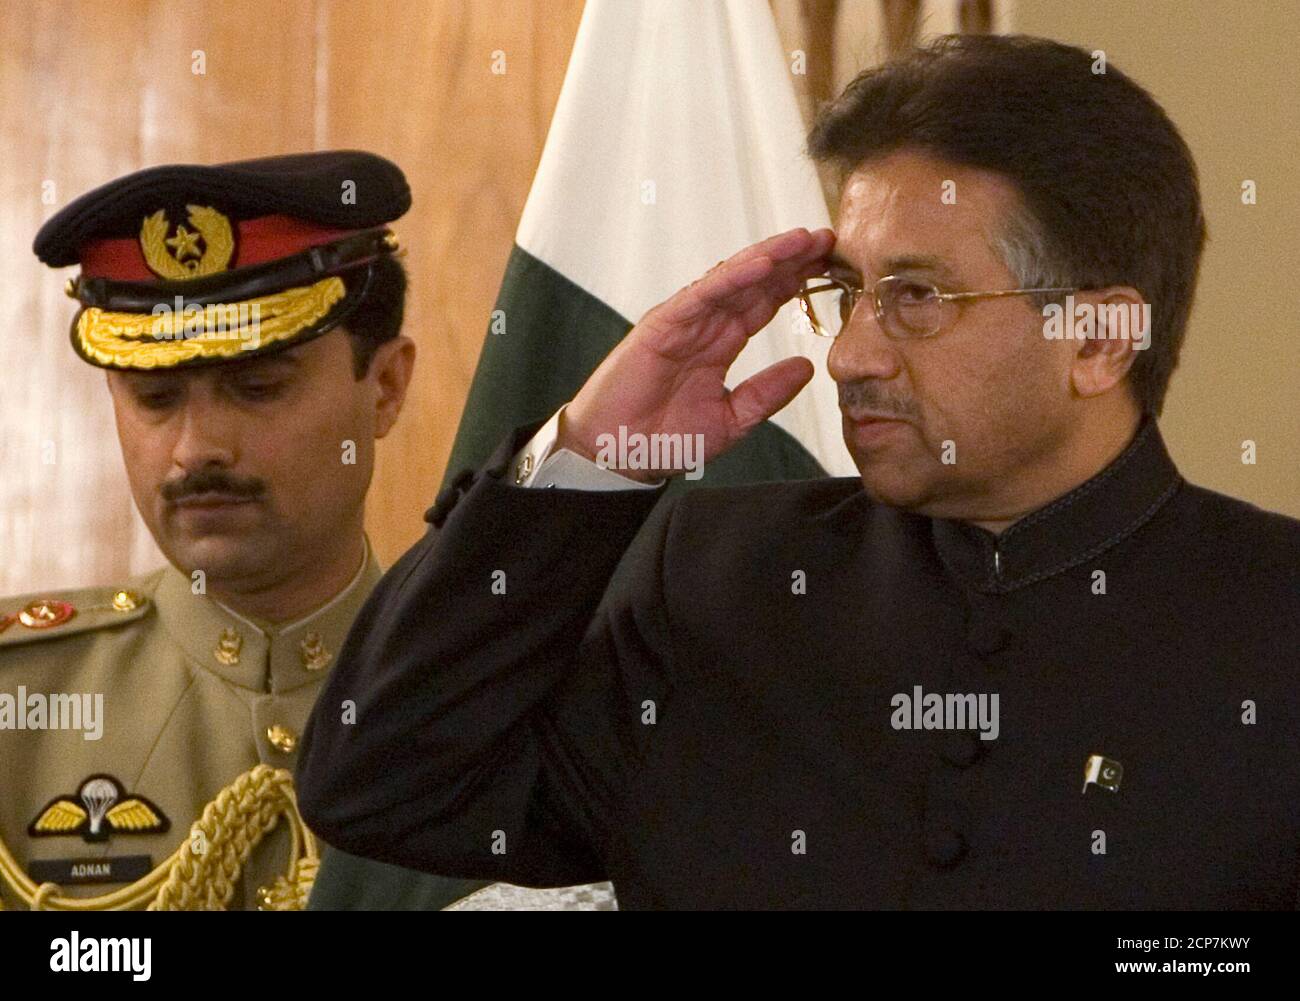 Pakistan's President Pervez Musharraf (R) salutes before being sworn in at the President House in Islamabad November 29, 2007. Musharraf was sworn in for a second term on Thursday, but this as a civilian leader a day after quitting as army chief and fulfilling a promise many Pakistanis doubted he would keep.  REUTERS/Adrees Latif    (PAKISTAN) Stock Photo